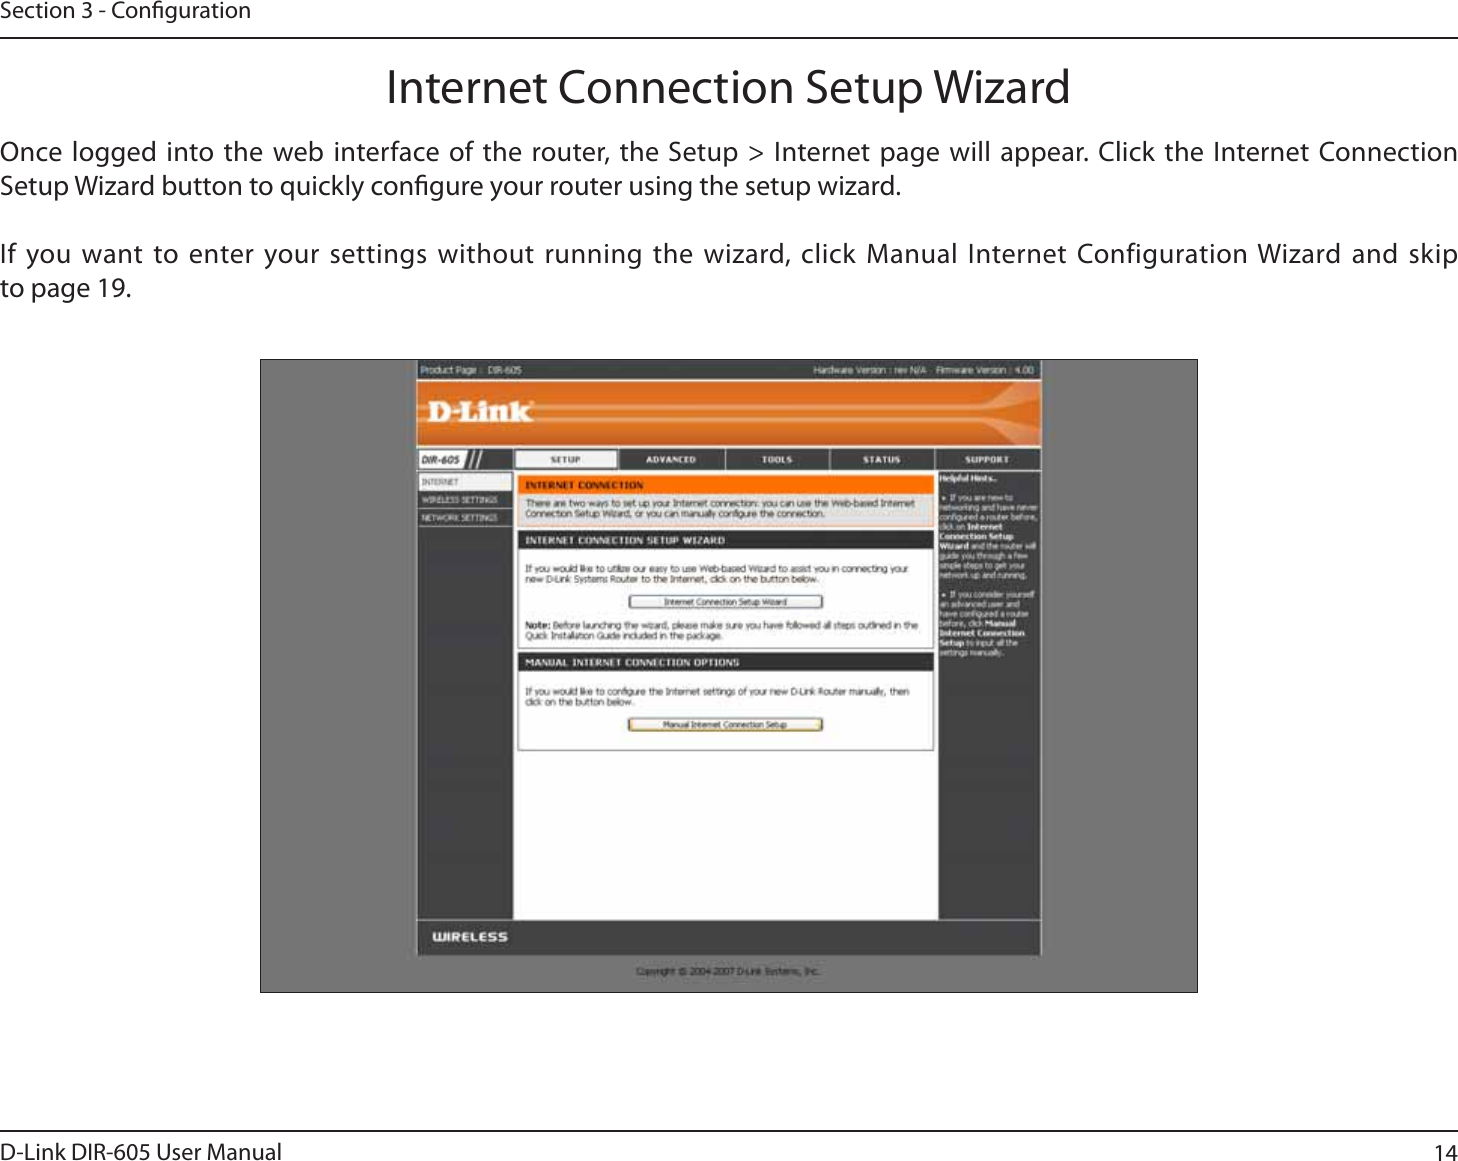 14D-Link DIR-605 User ManualSection 3 - CongurationInternet Connection Setup WizardOnce logged into the web interface of the router, the Setup &gt; Internet page will appear. Click the Internet Connection Setup Wizard button to quickly congure your router using the setup wizard.If you want to enter your settings without running the wizard, click Manual Internet Configuration Wizard and skip to page 19.